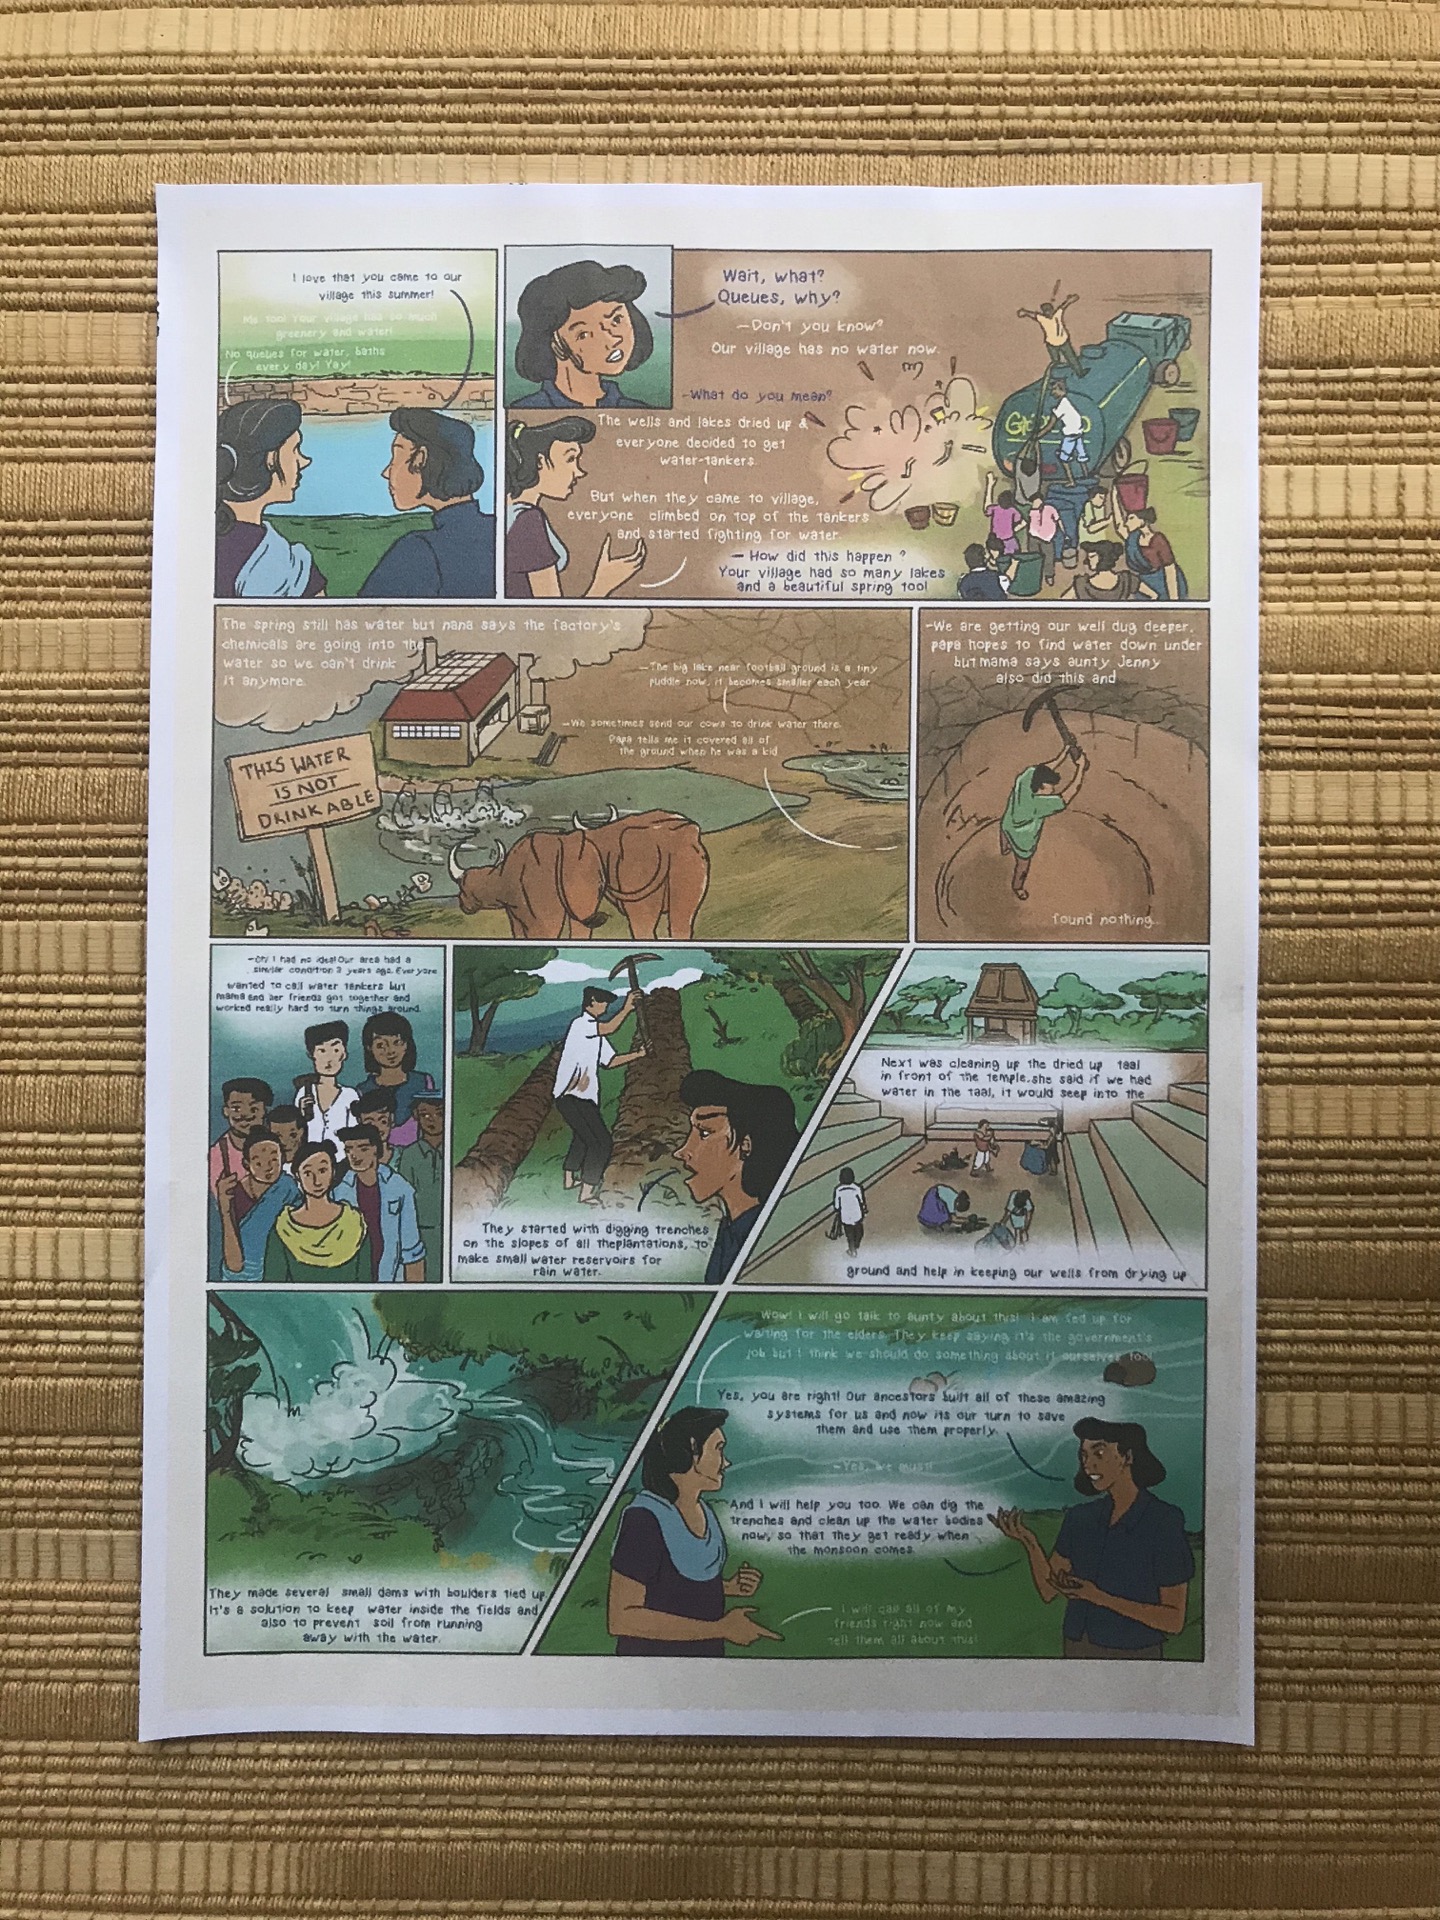 One of many comics created to highlight Goa's natural diversity